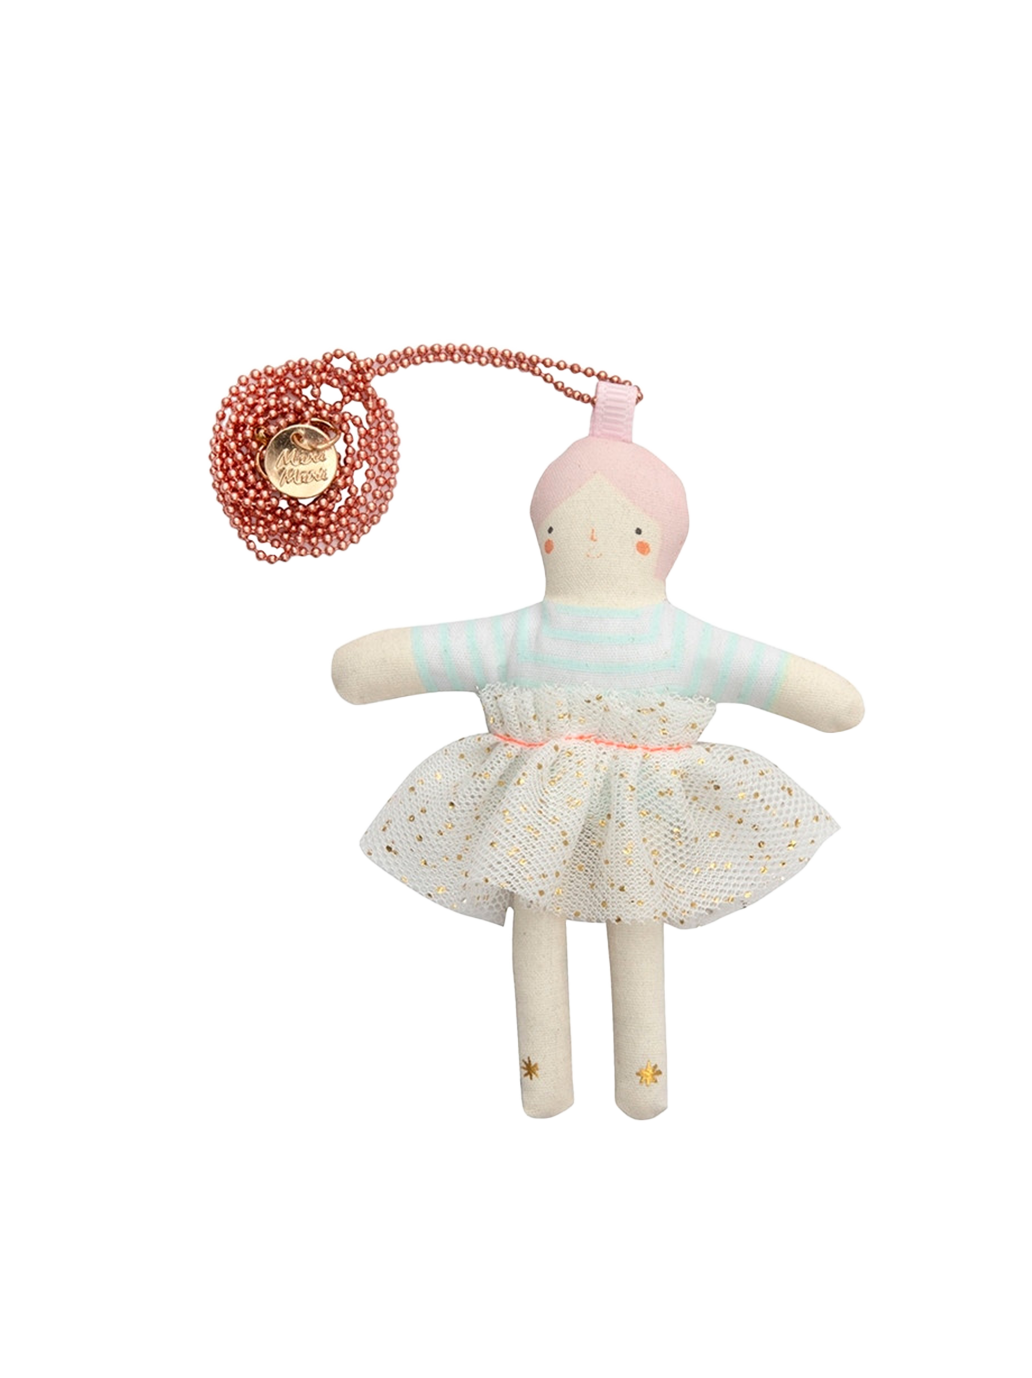 necklace with a doll